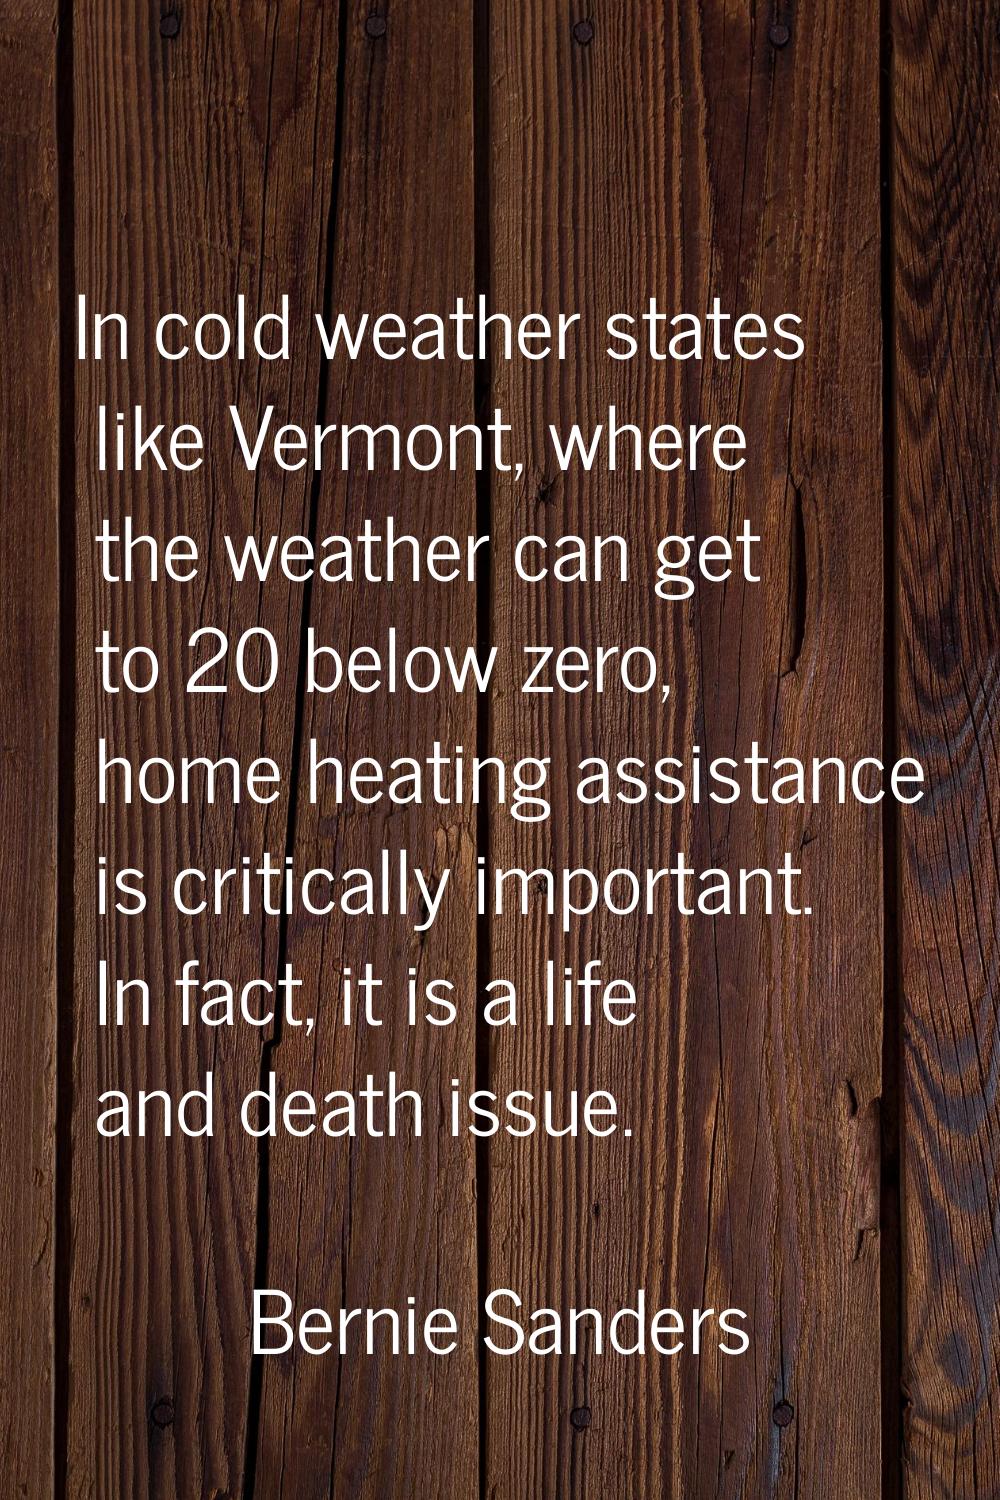 In cold weather states like Vermont, where the weather can get to 20 below zero, home heating assis